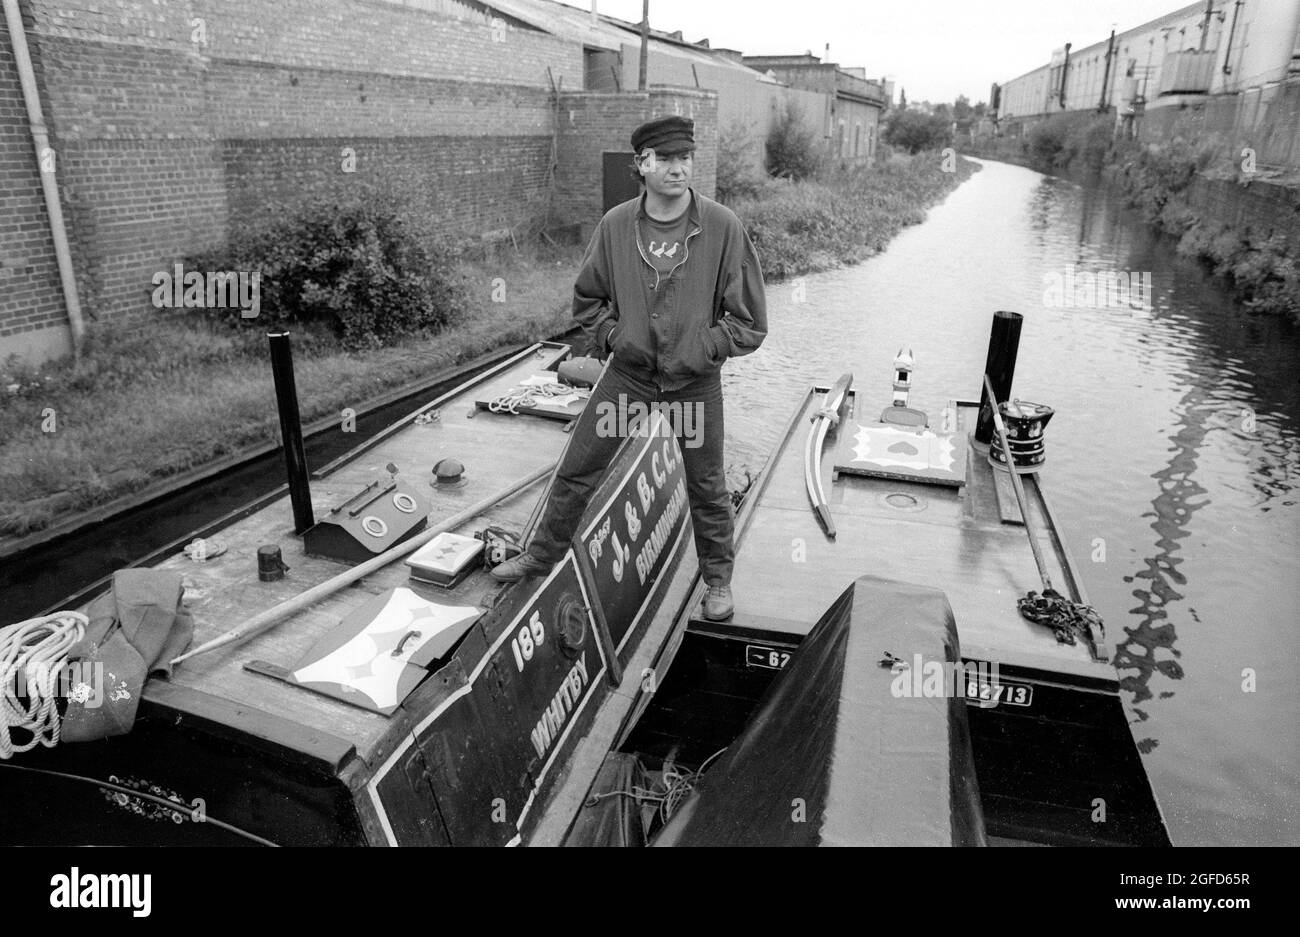 Astride two narrow boats in the Birmingham canals actor Michael Elphick as BOON the leading character for the Central TV series BOON in 1985 takes time of from filming to enjoy the life on canal craft. Stock Photo